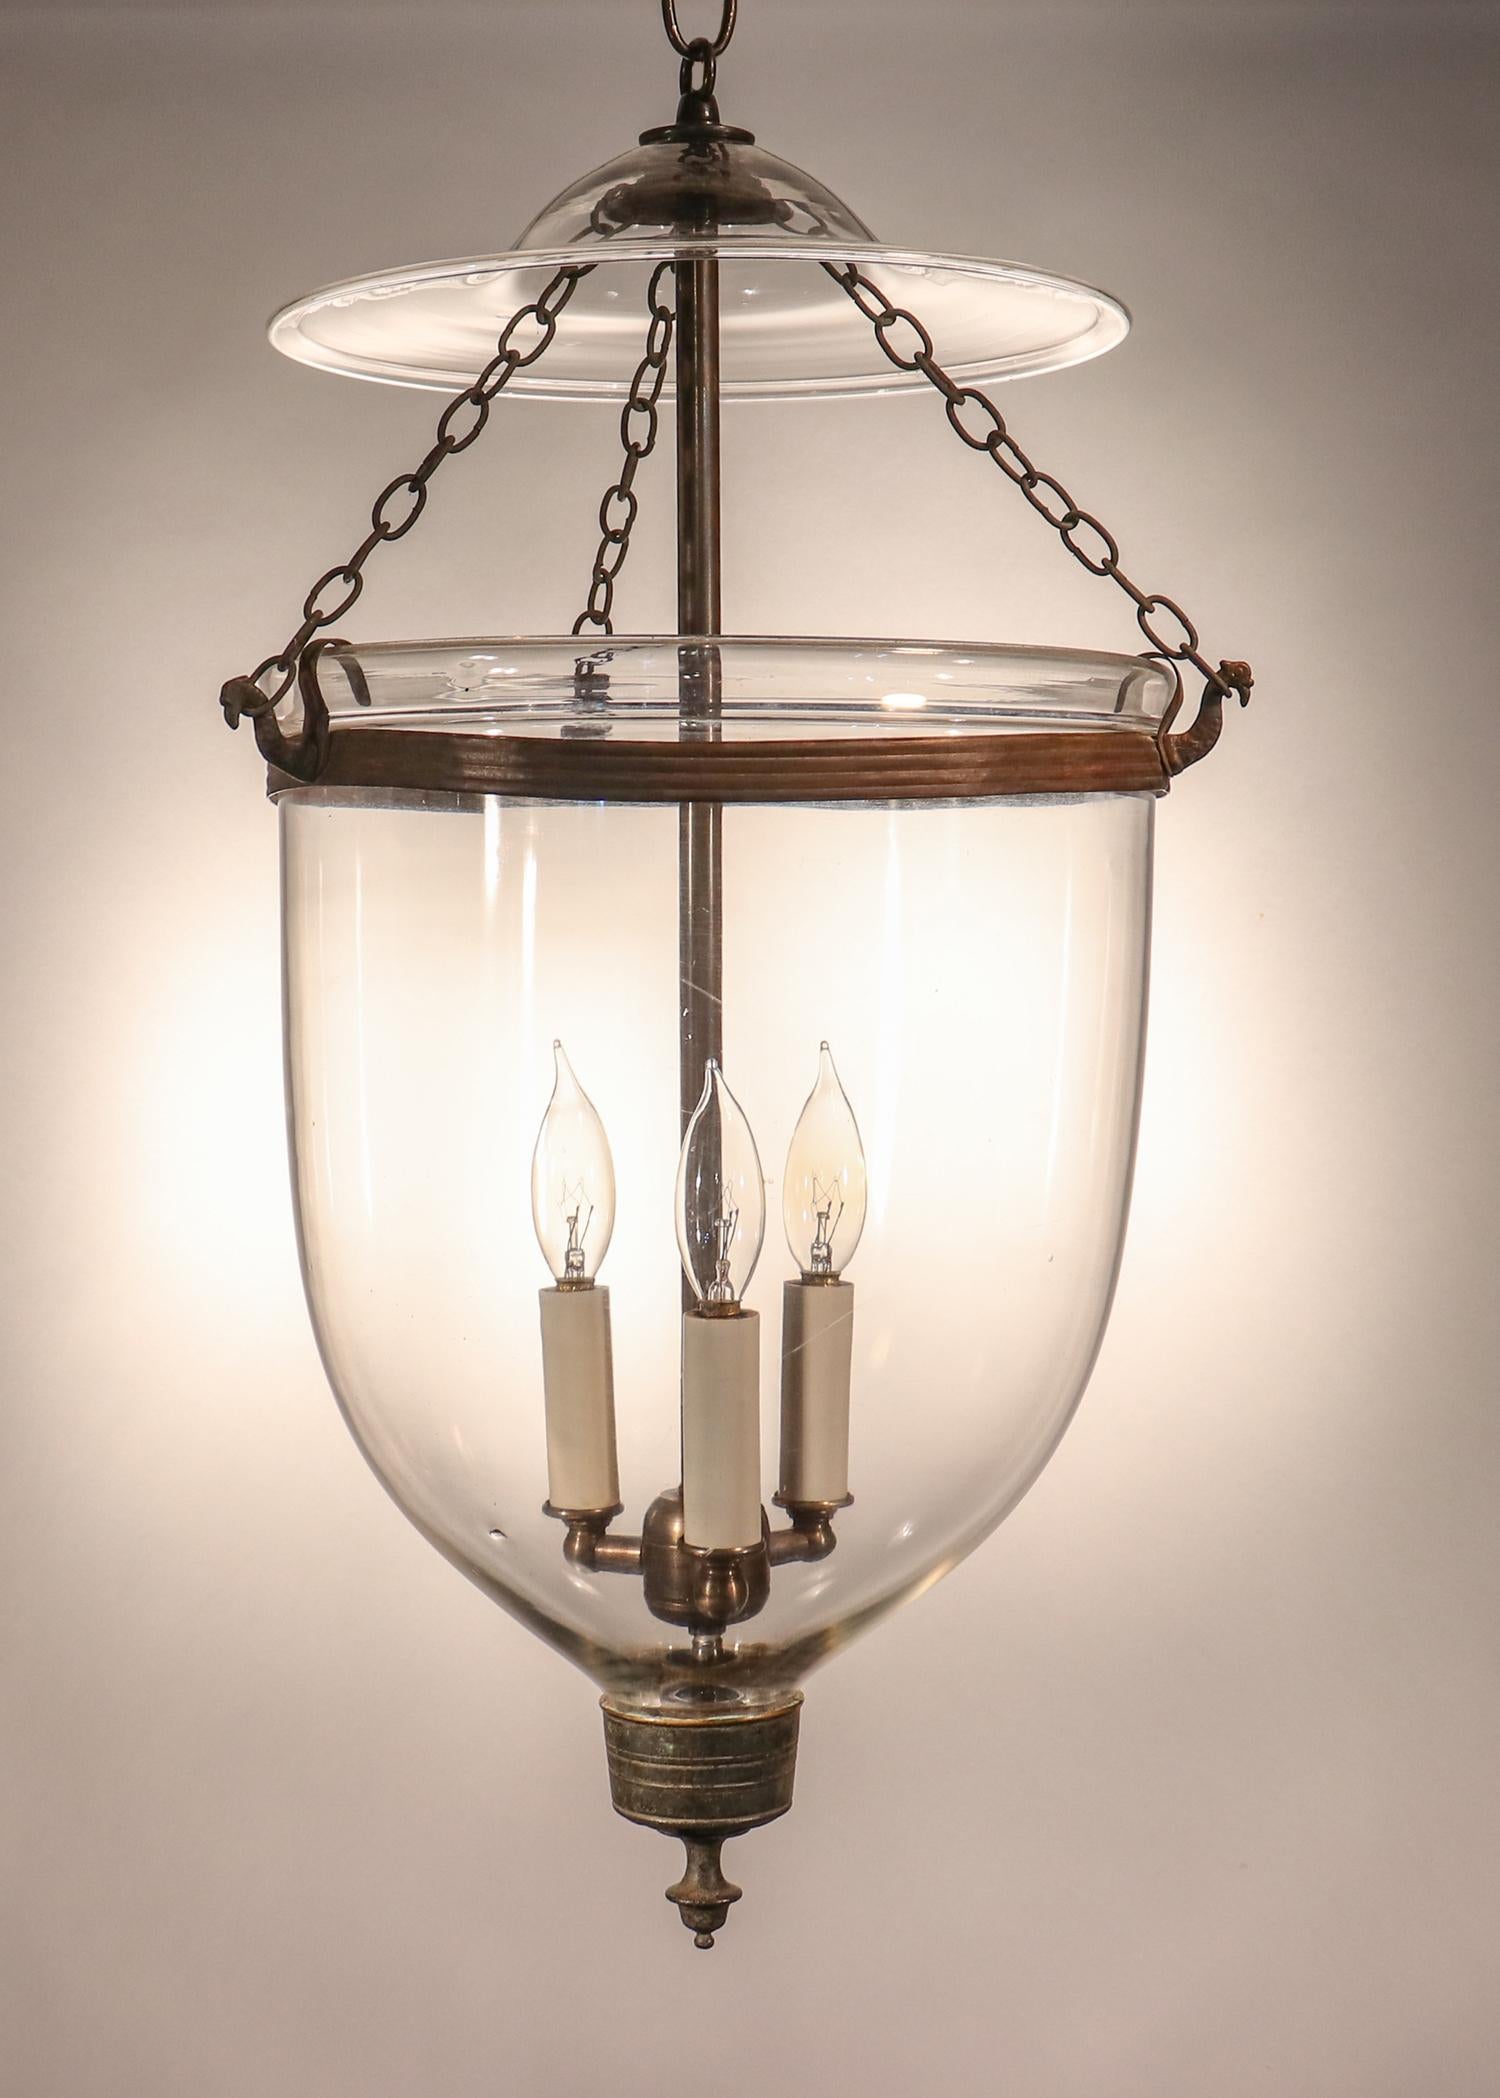 An antique bell jar lantern from England, circa 1860, with very good quality hand blown glass and particularly lovely form. The bell jar pendant features its original rolled brass band that is joined, brass finial/candleholder base, and chains. It